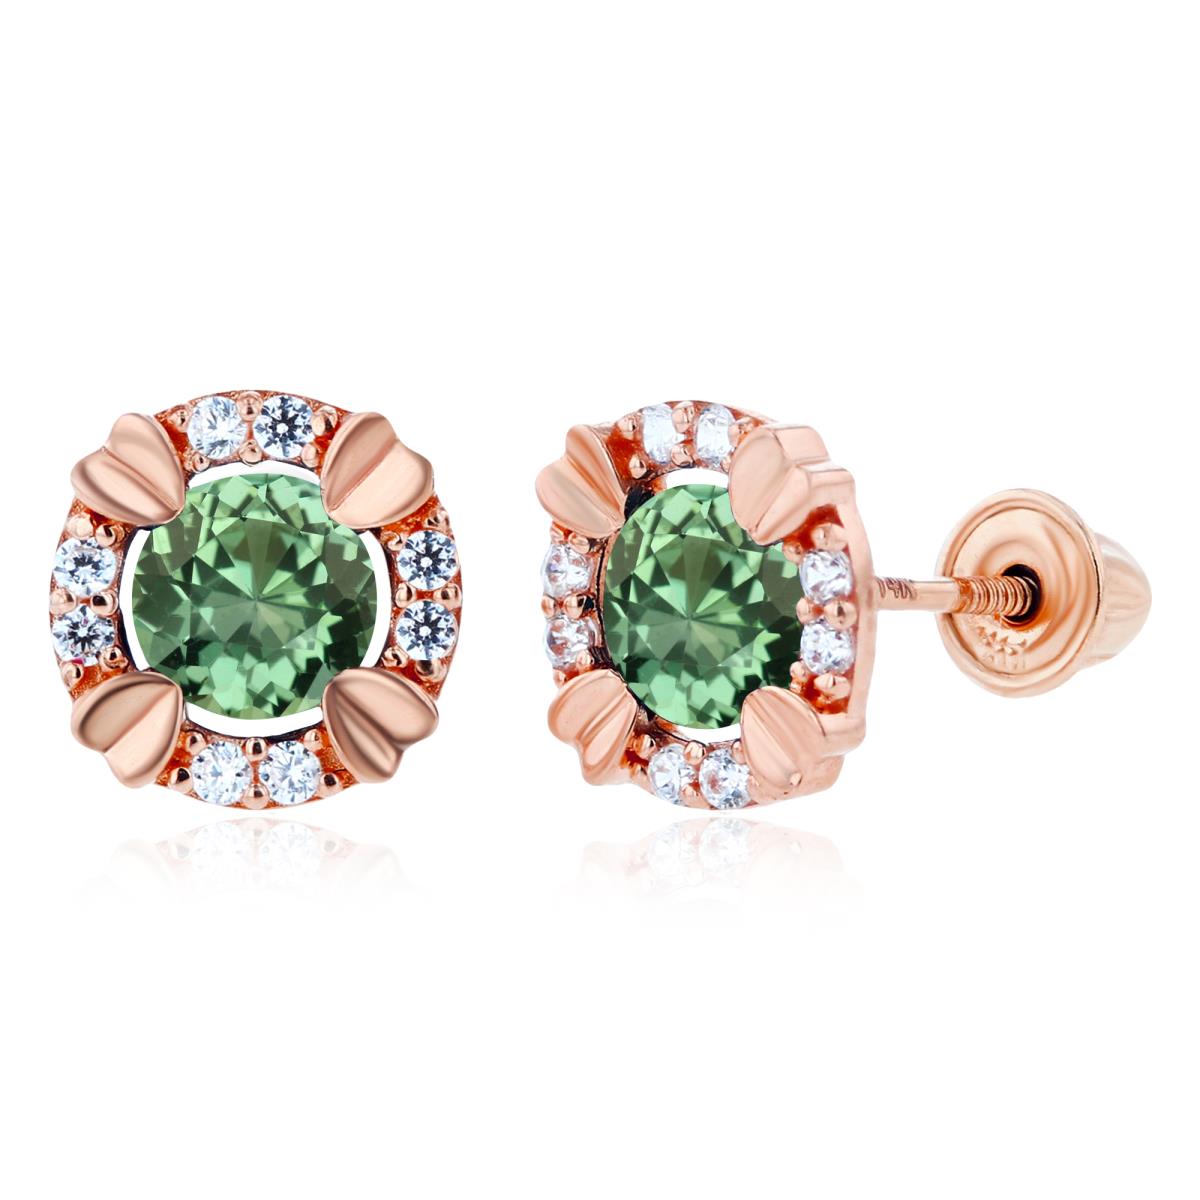 14K Rose Gold 4mm Round Created Green Sapphire & 1mm Created White Sapphire Halo Screwback Earrings